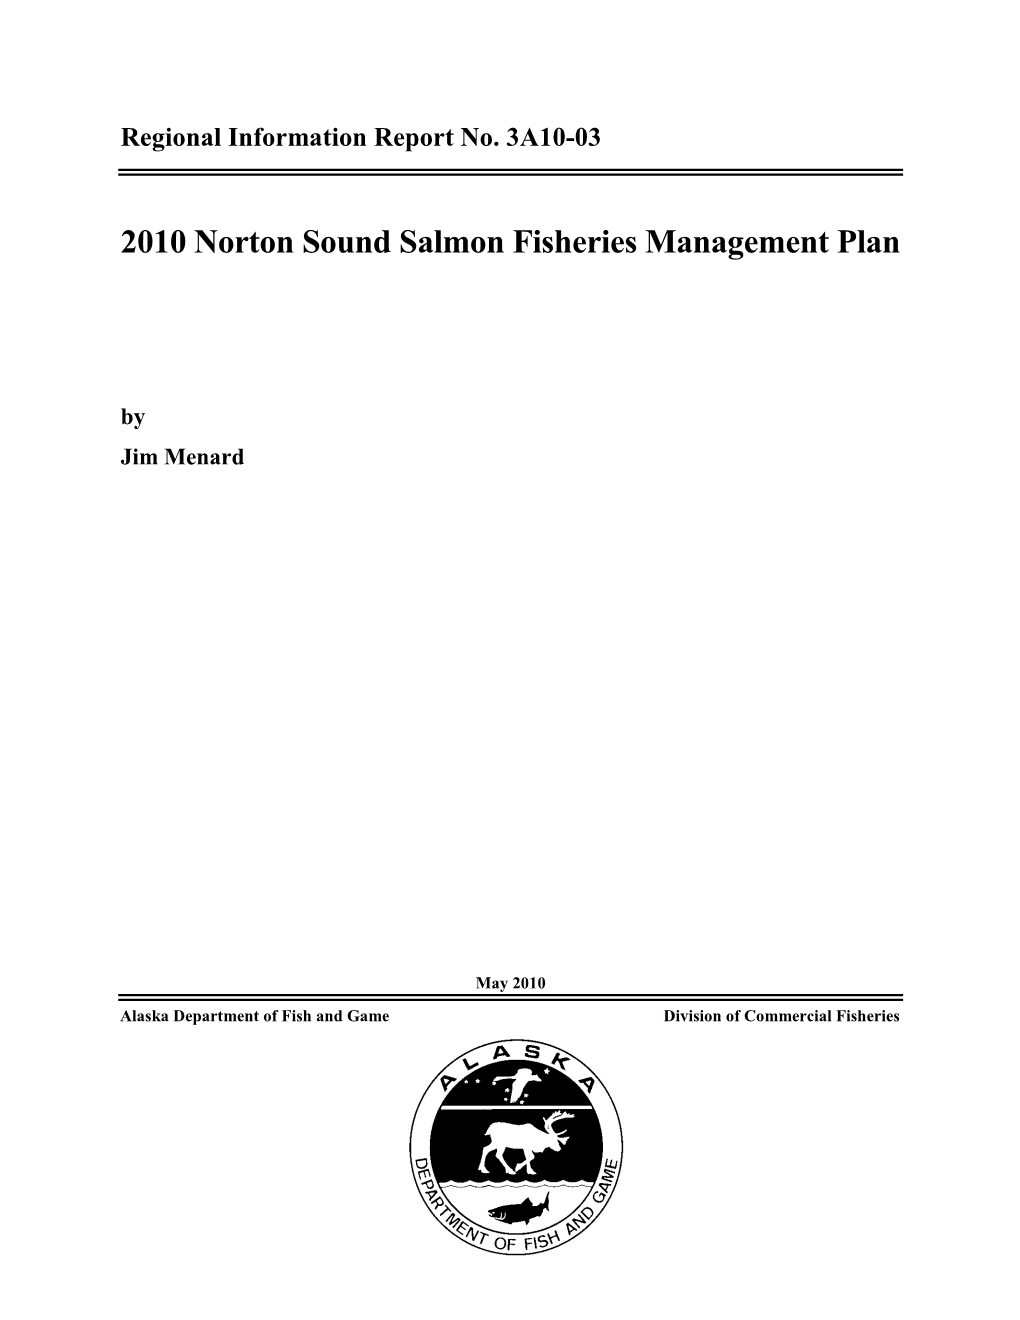 2010 Norton Sound Salmon Fisheries Management Plan. Alaska Department of Fish and Game, Division of Commercial Fisheries, Regional Information Report No